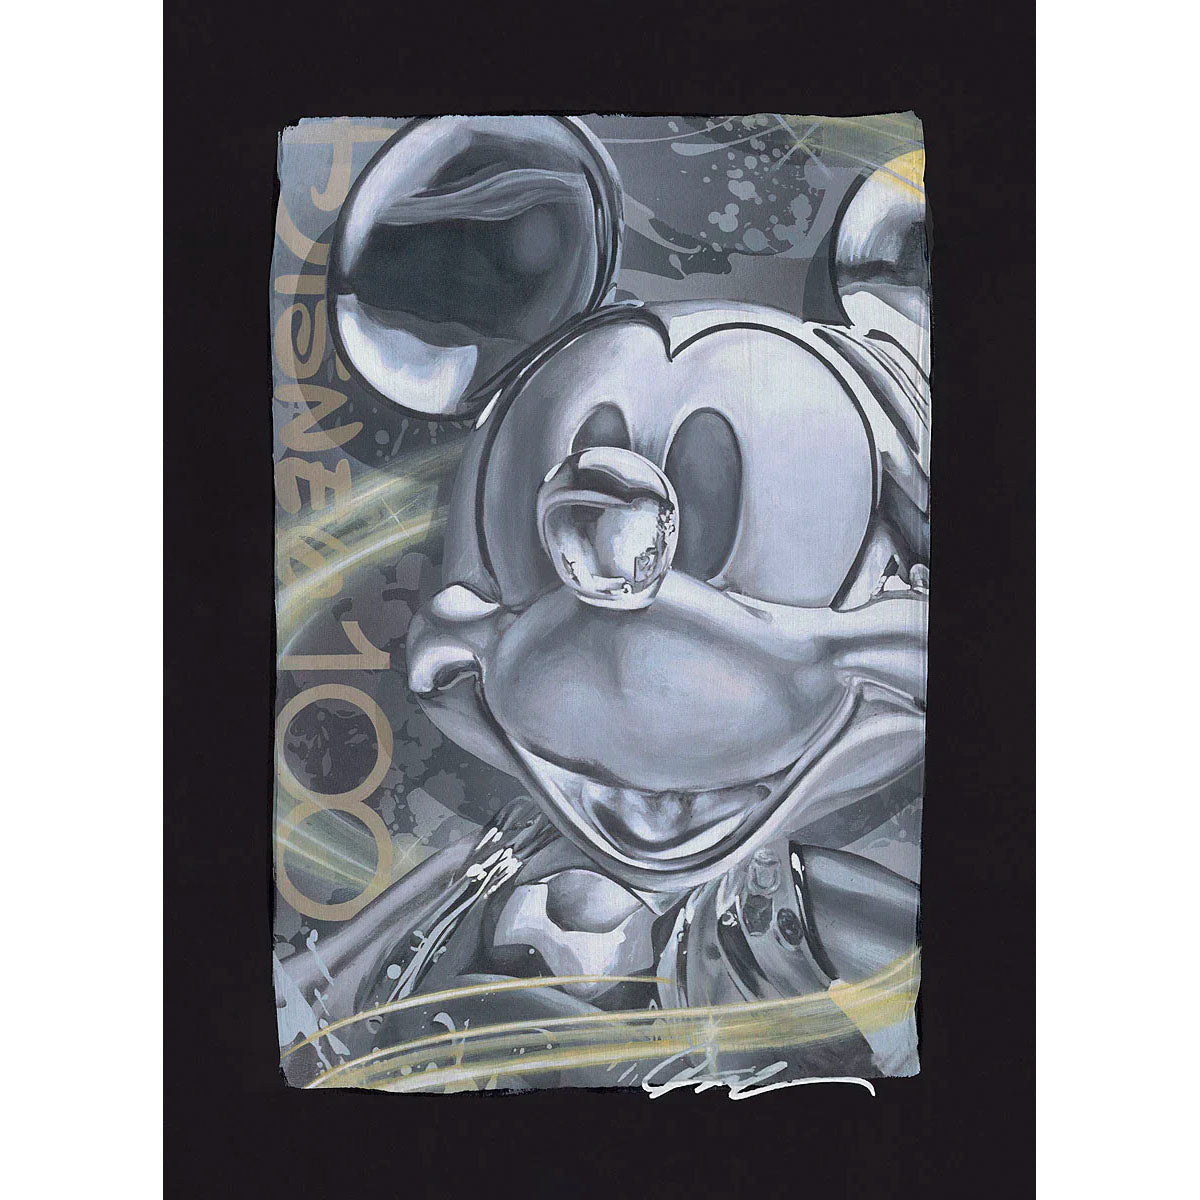 Arcy Disney "Celebrating 100 Years" Limited Edition Canvas Giclee